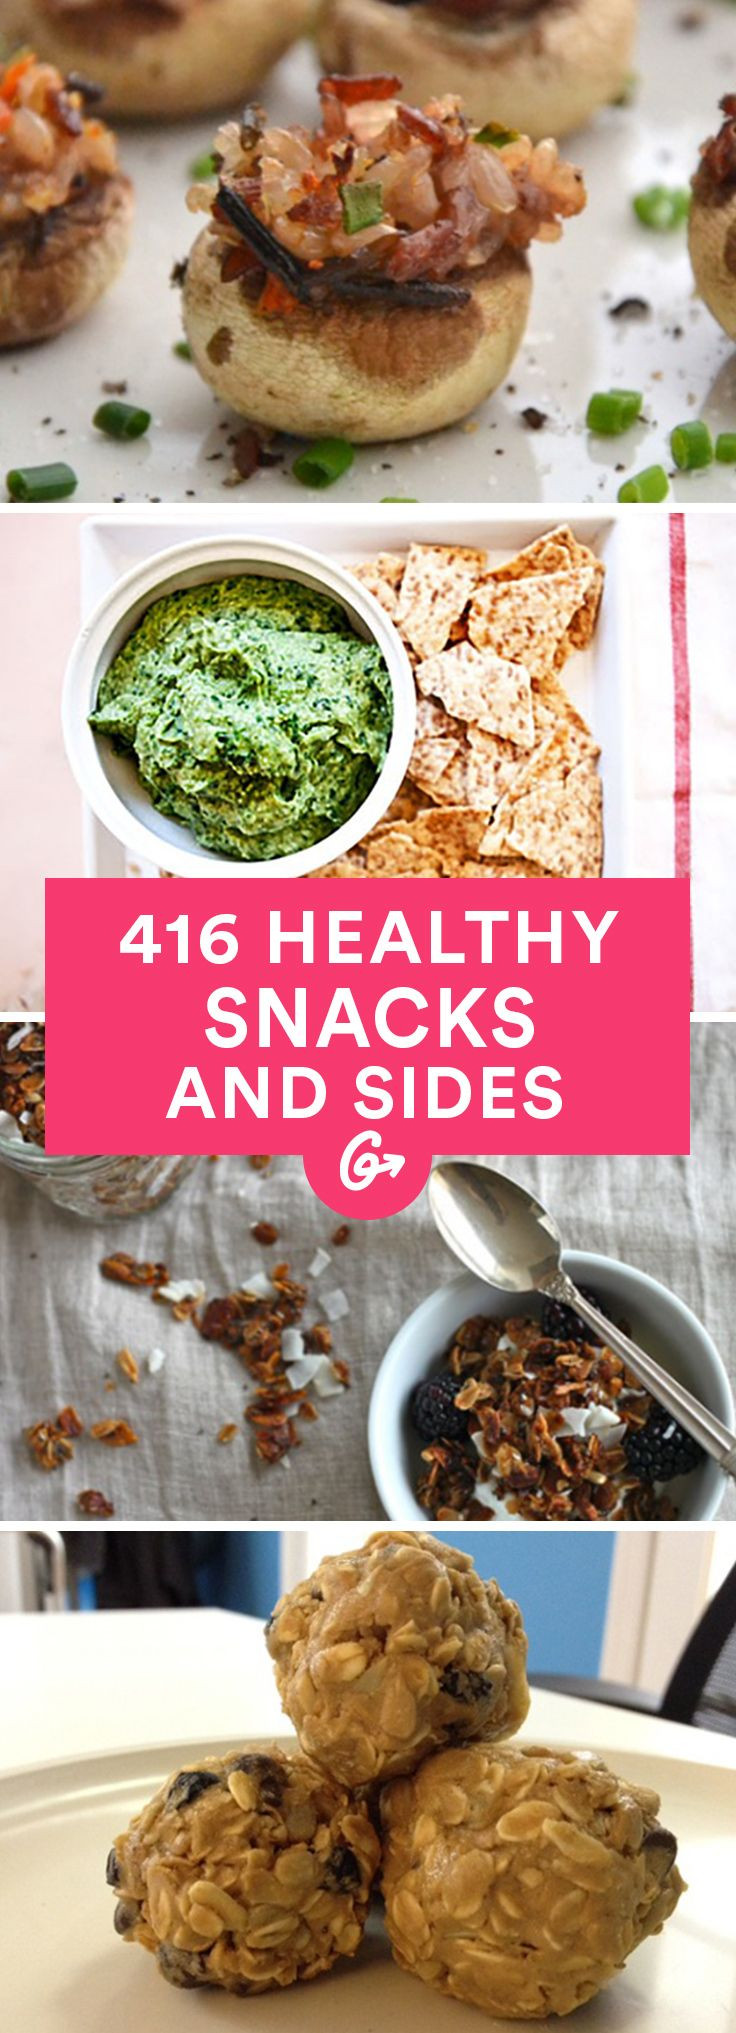 Cheap Easy Healthy Snacks
 17 Best ideas about Cheap Healthy Snacks on Pinterest